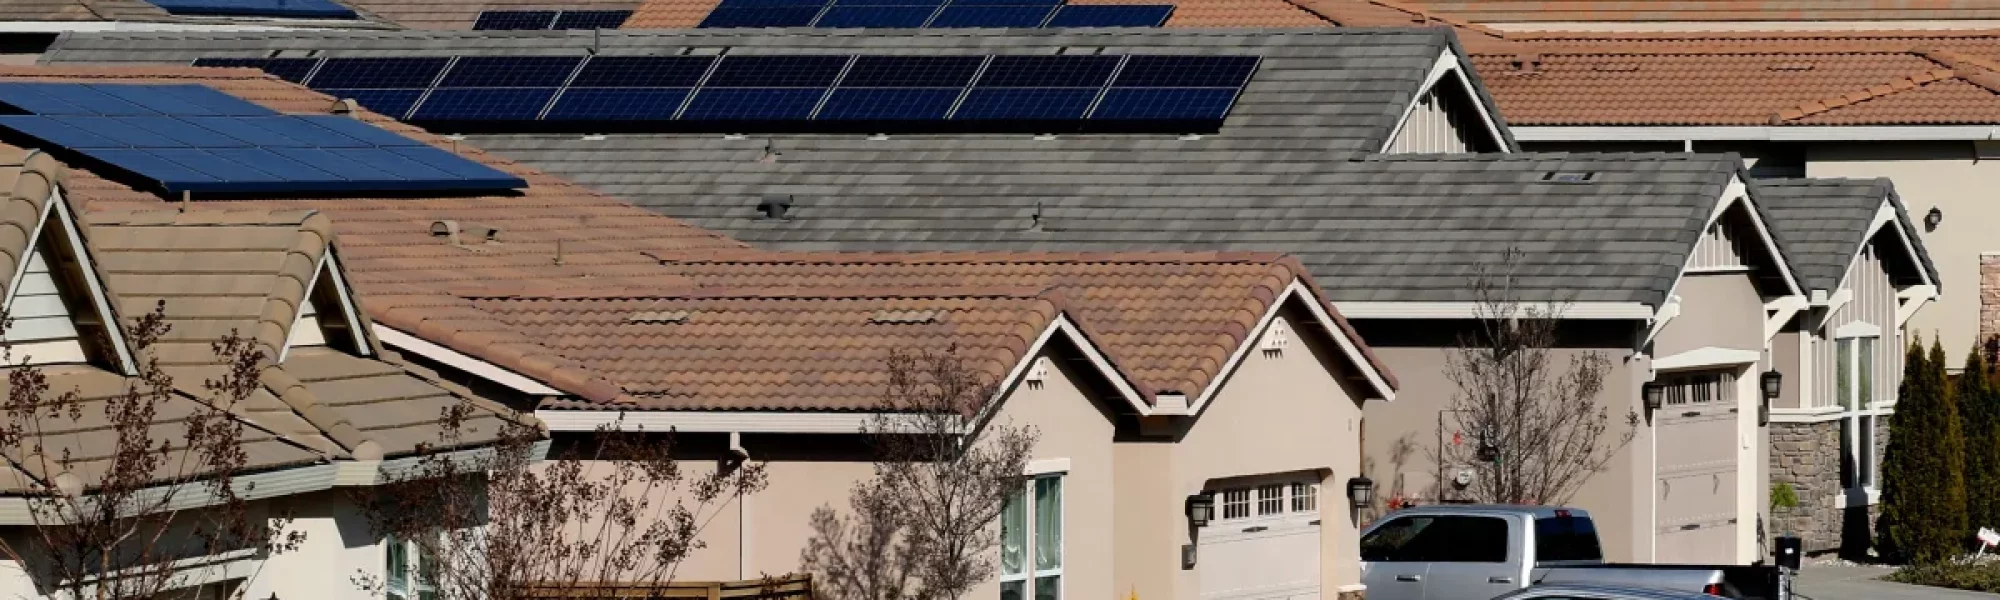 A flurry of environmental tax breaks just came into effect thanks to last year's climate bill. From solar to electric vehicles, here's how you could save thousands of dollars.